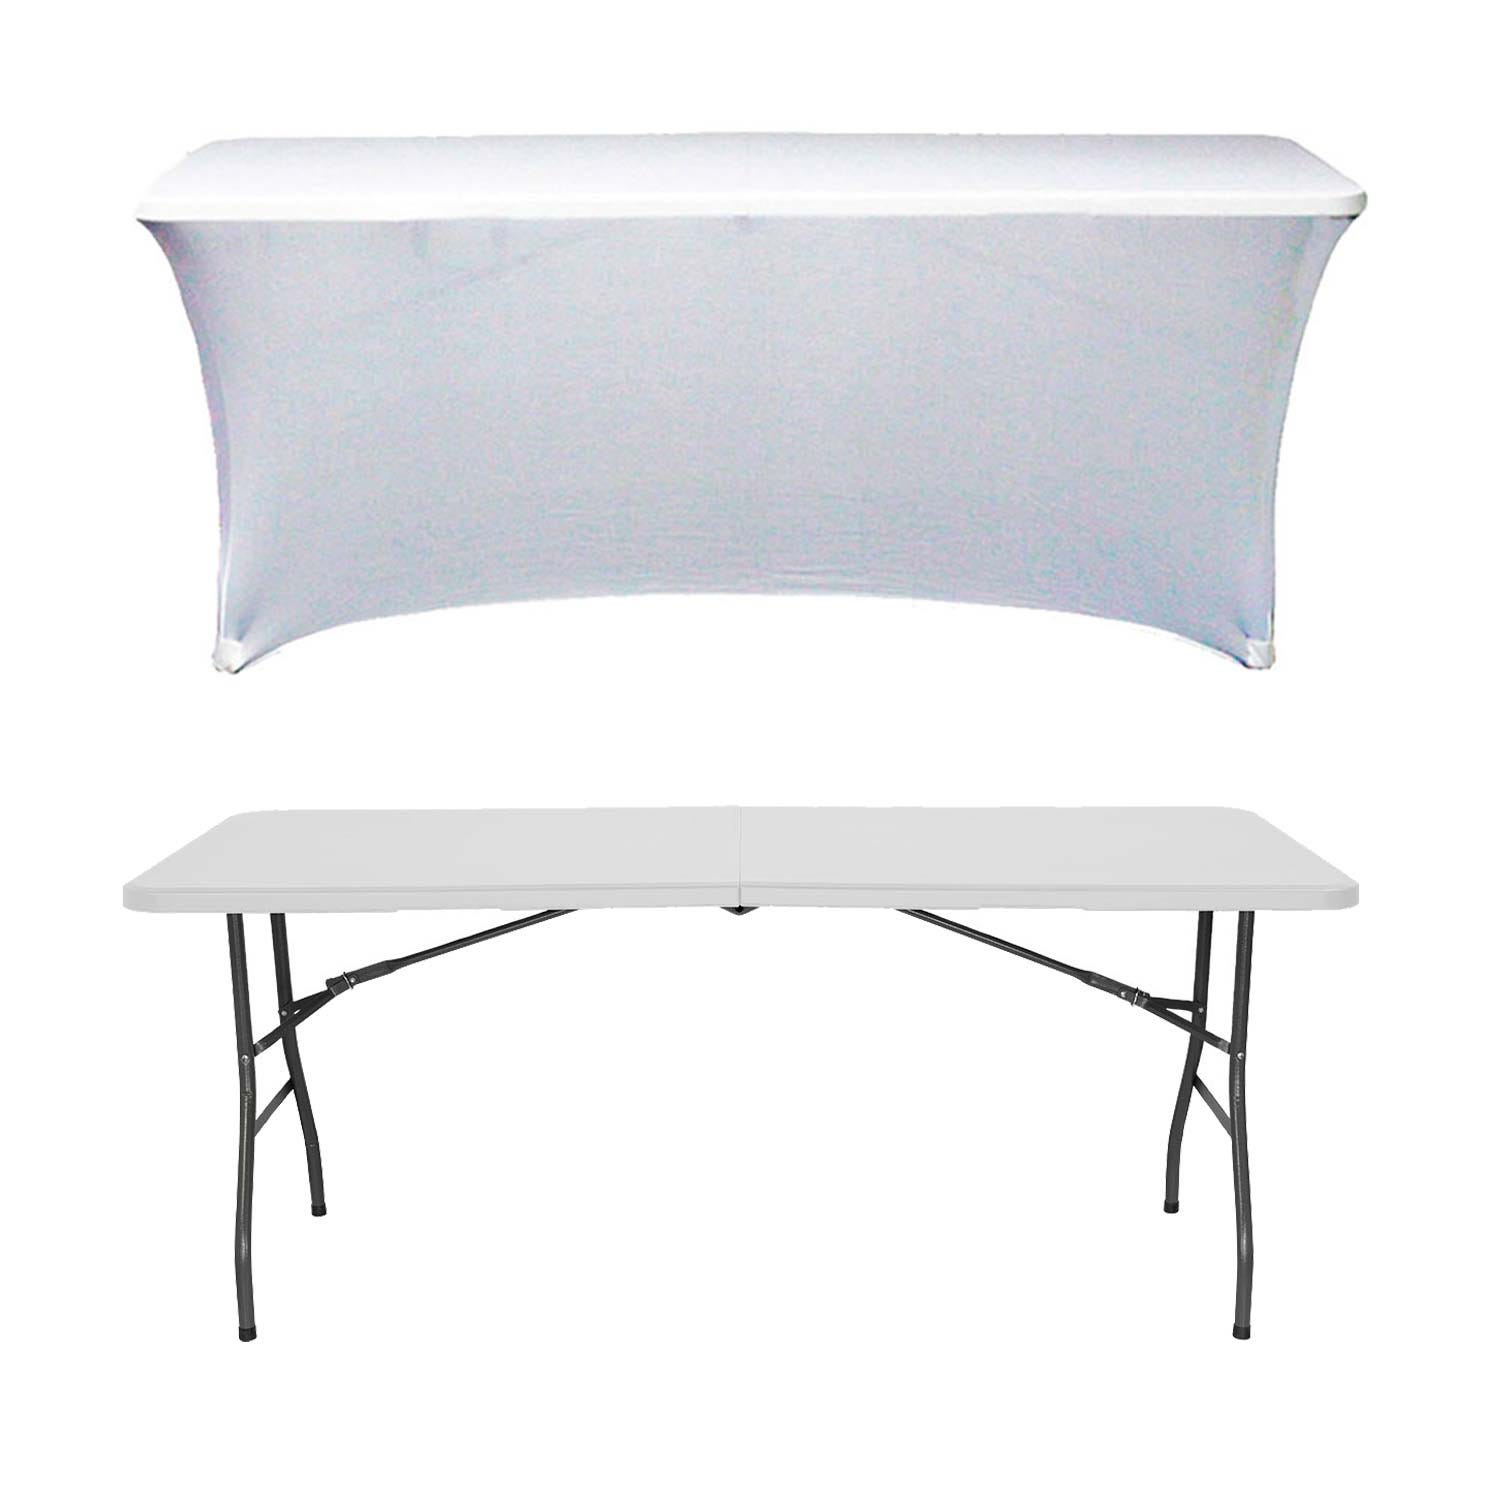 Table Pliante 150cm Rectangulaire Blanc Catering O91